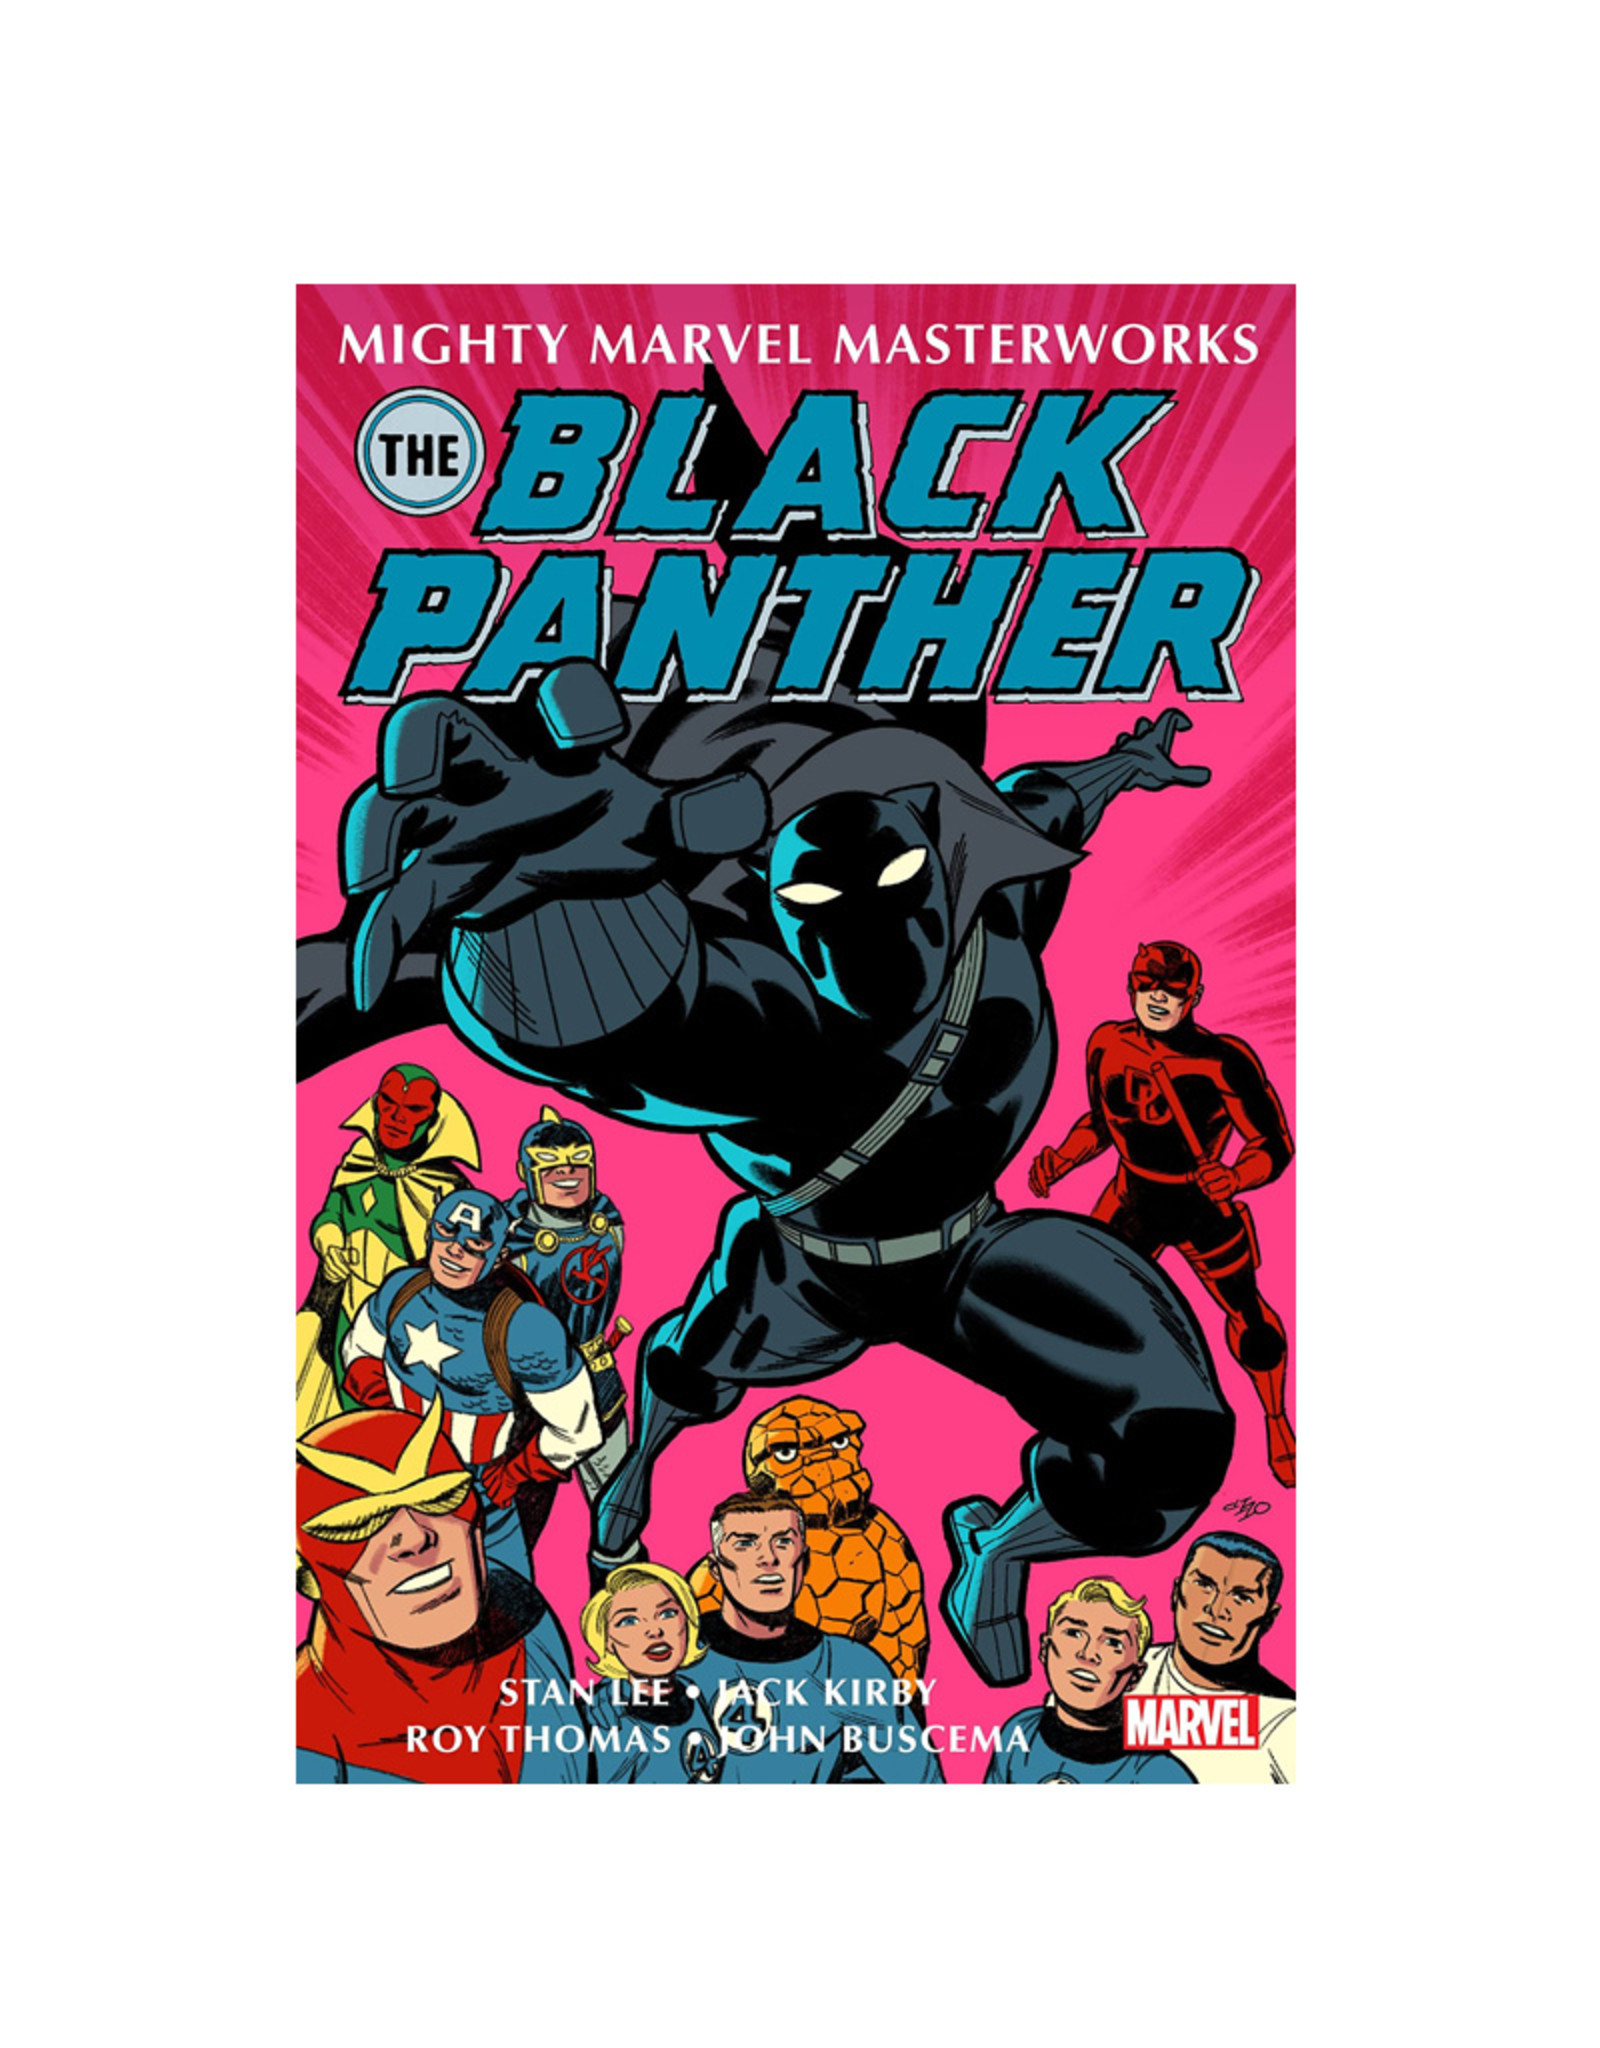 Marvel Comics Mighty Marvel Masterworks The Black Panther The Claws of the Panther TP Volume 01